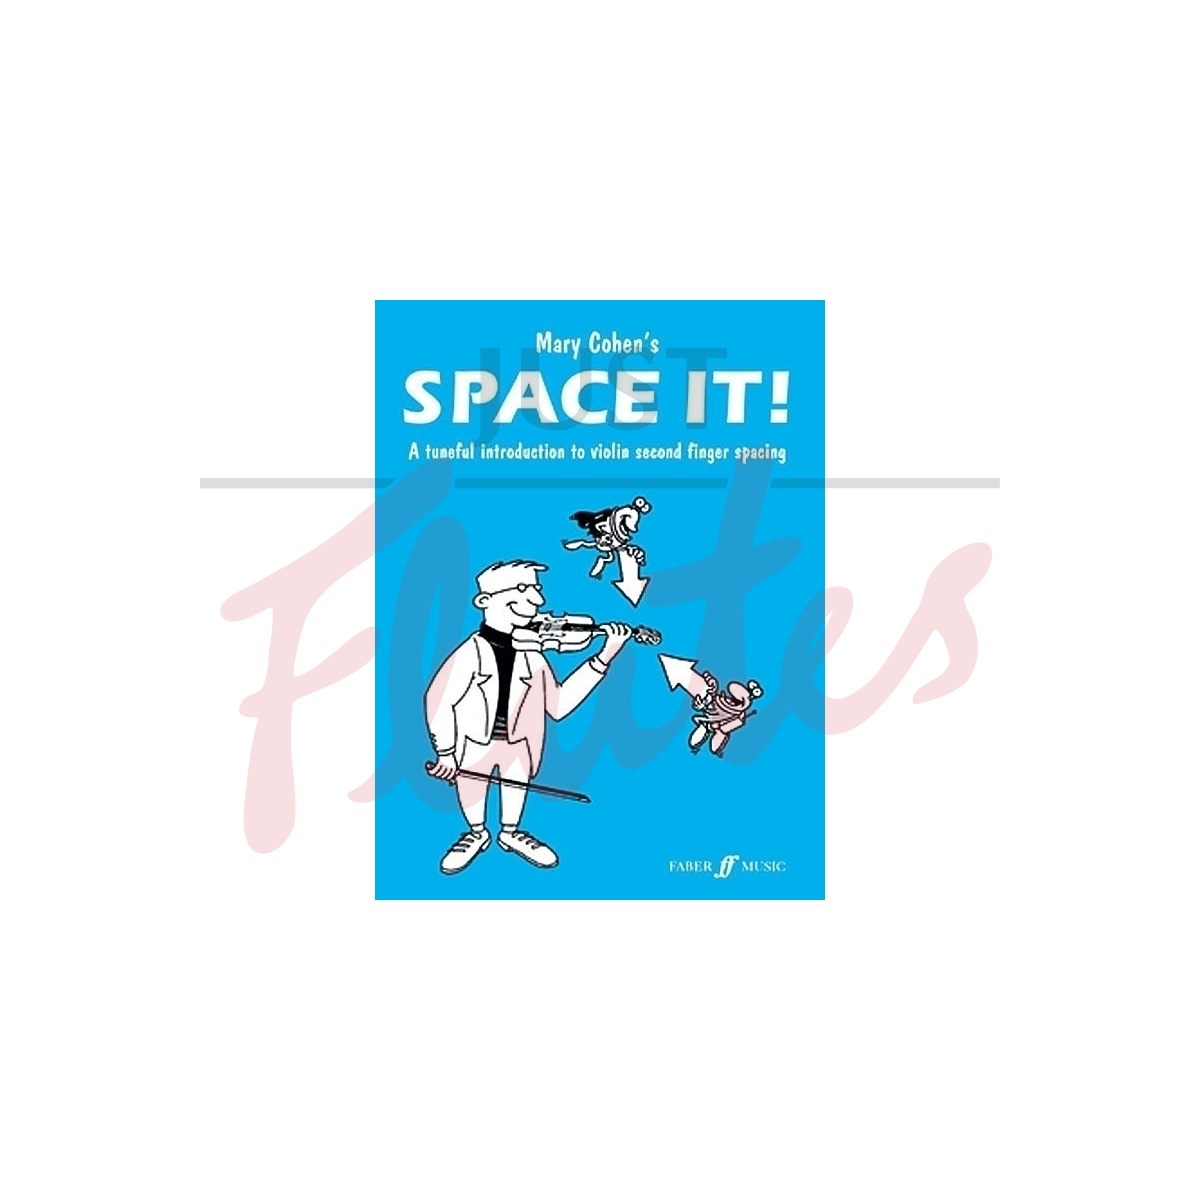 Space It! Tuneful Guide to Second Finger Spacing